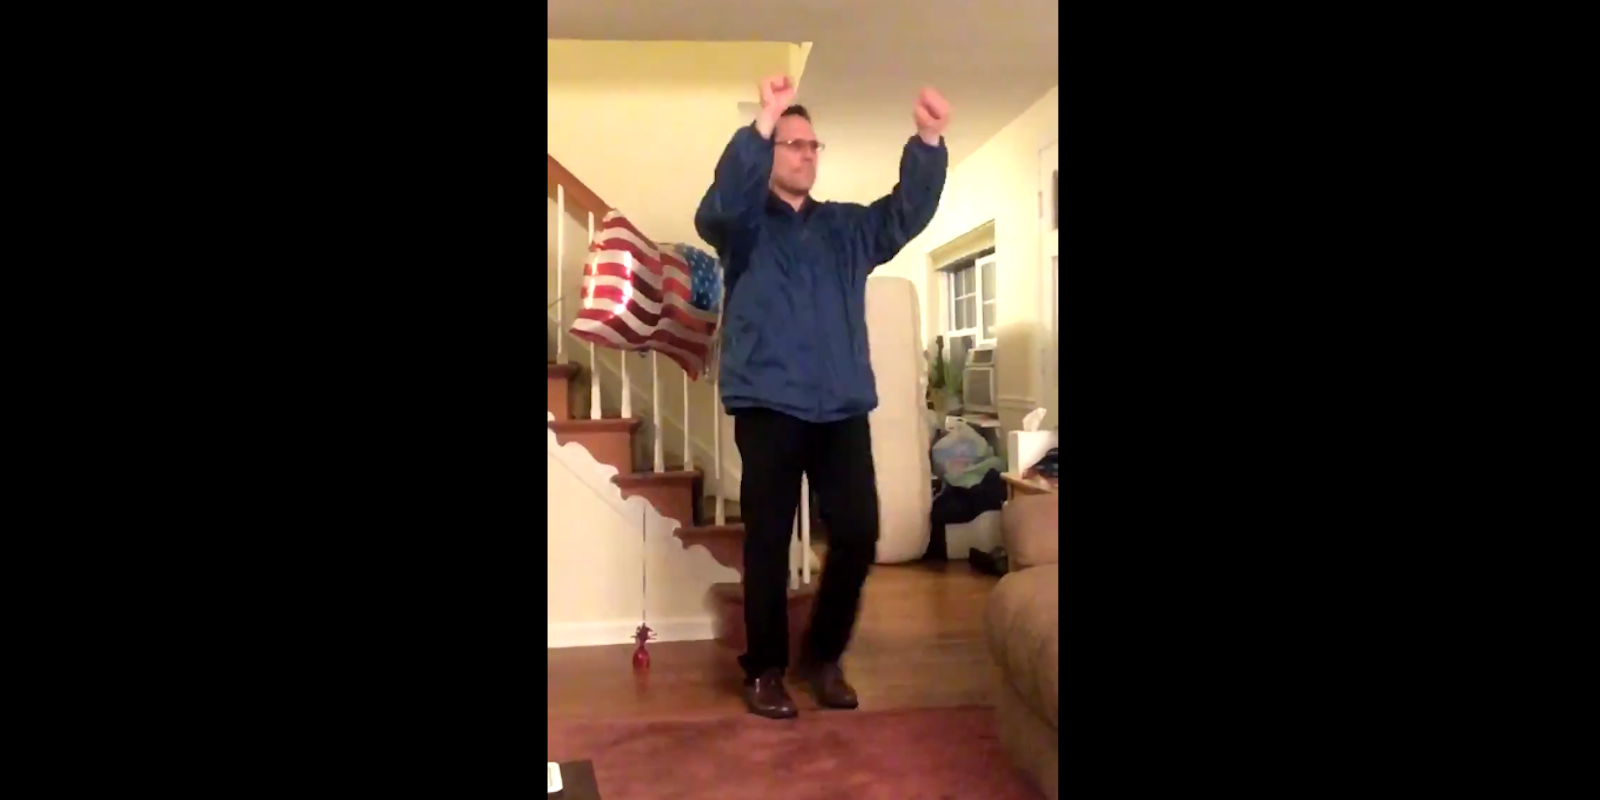 Dads dancing to 'My Blood' by 21 Pilots